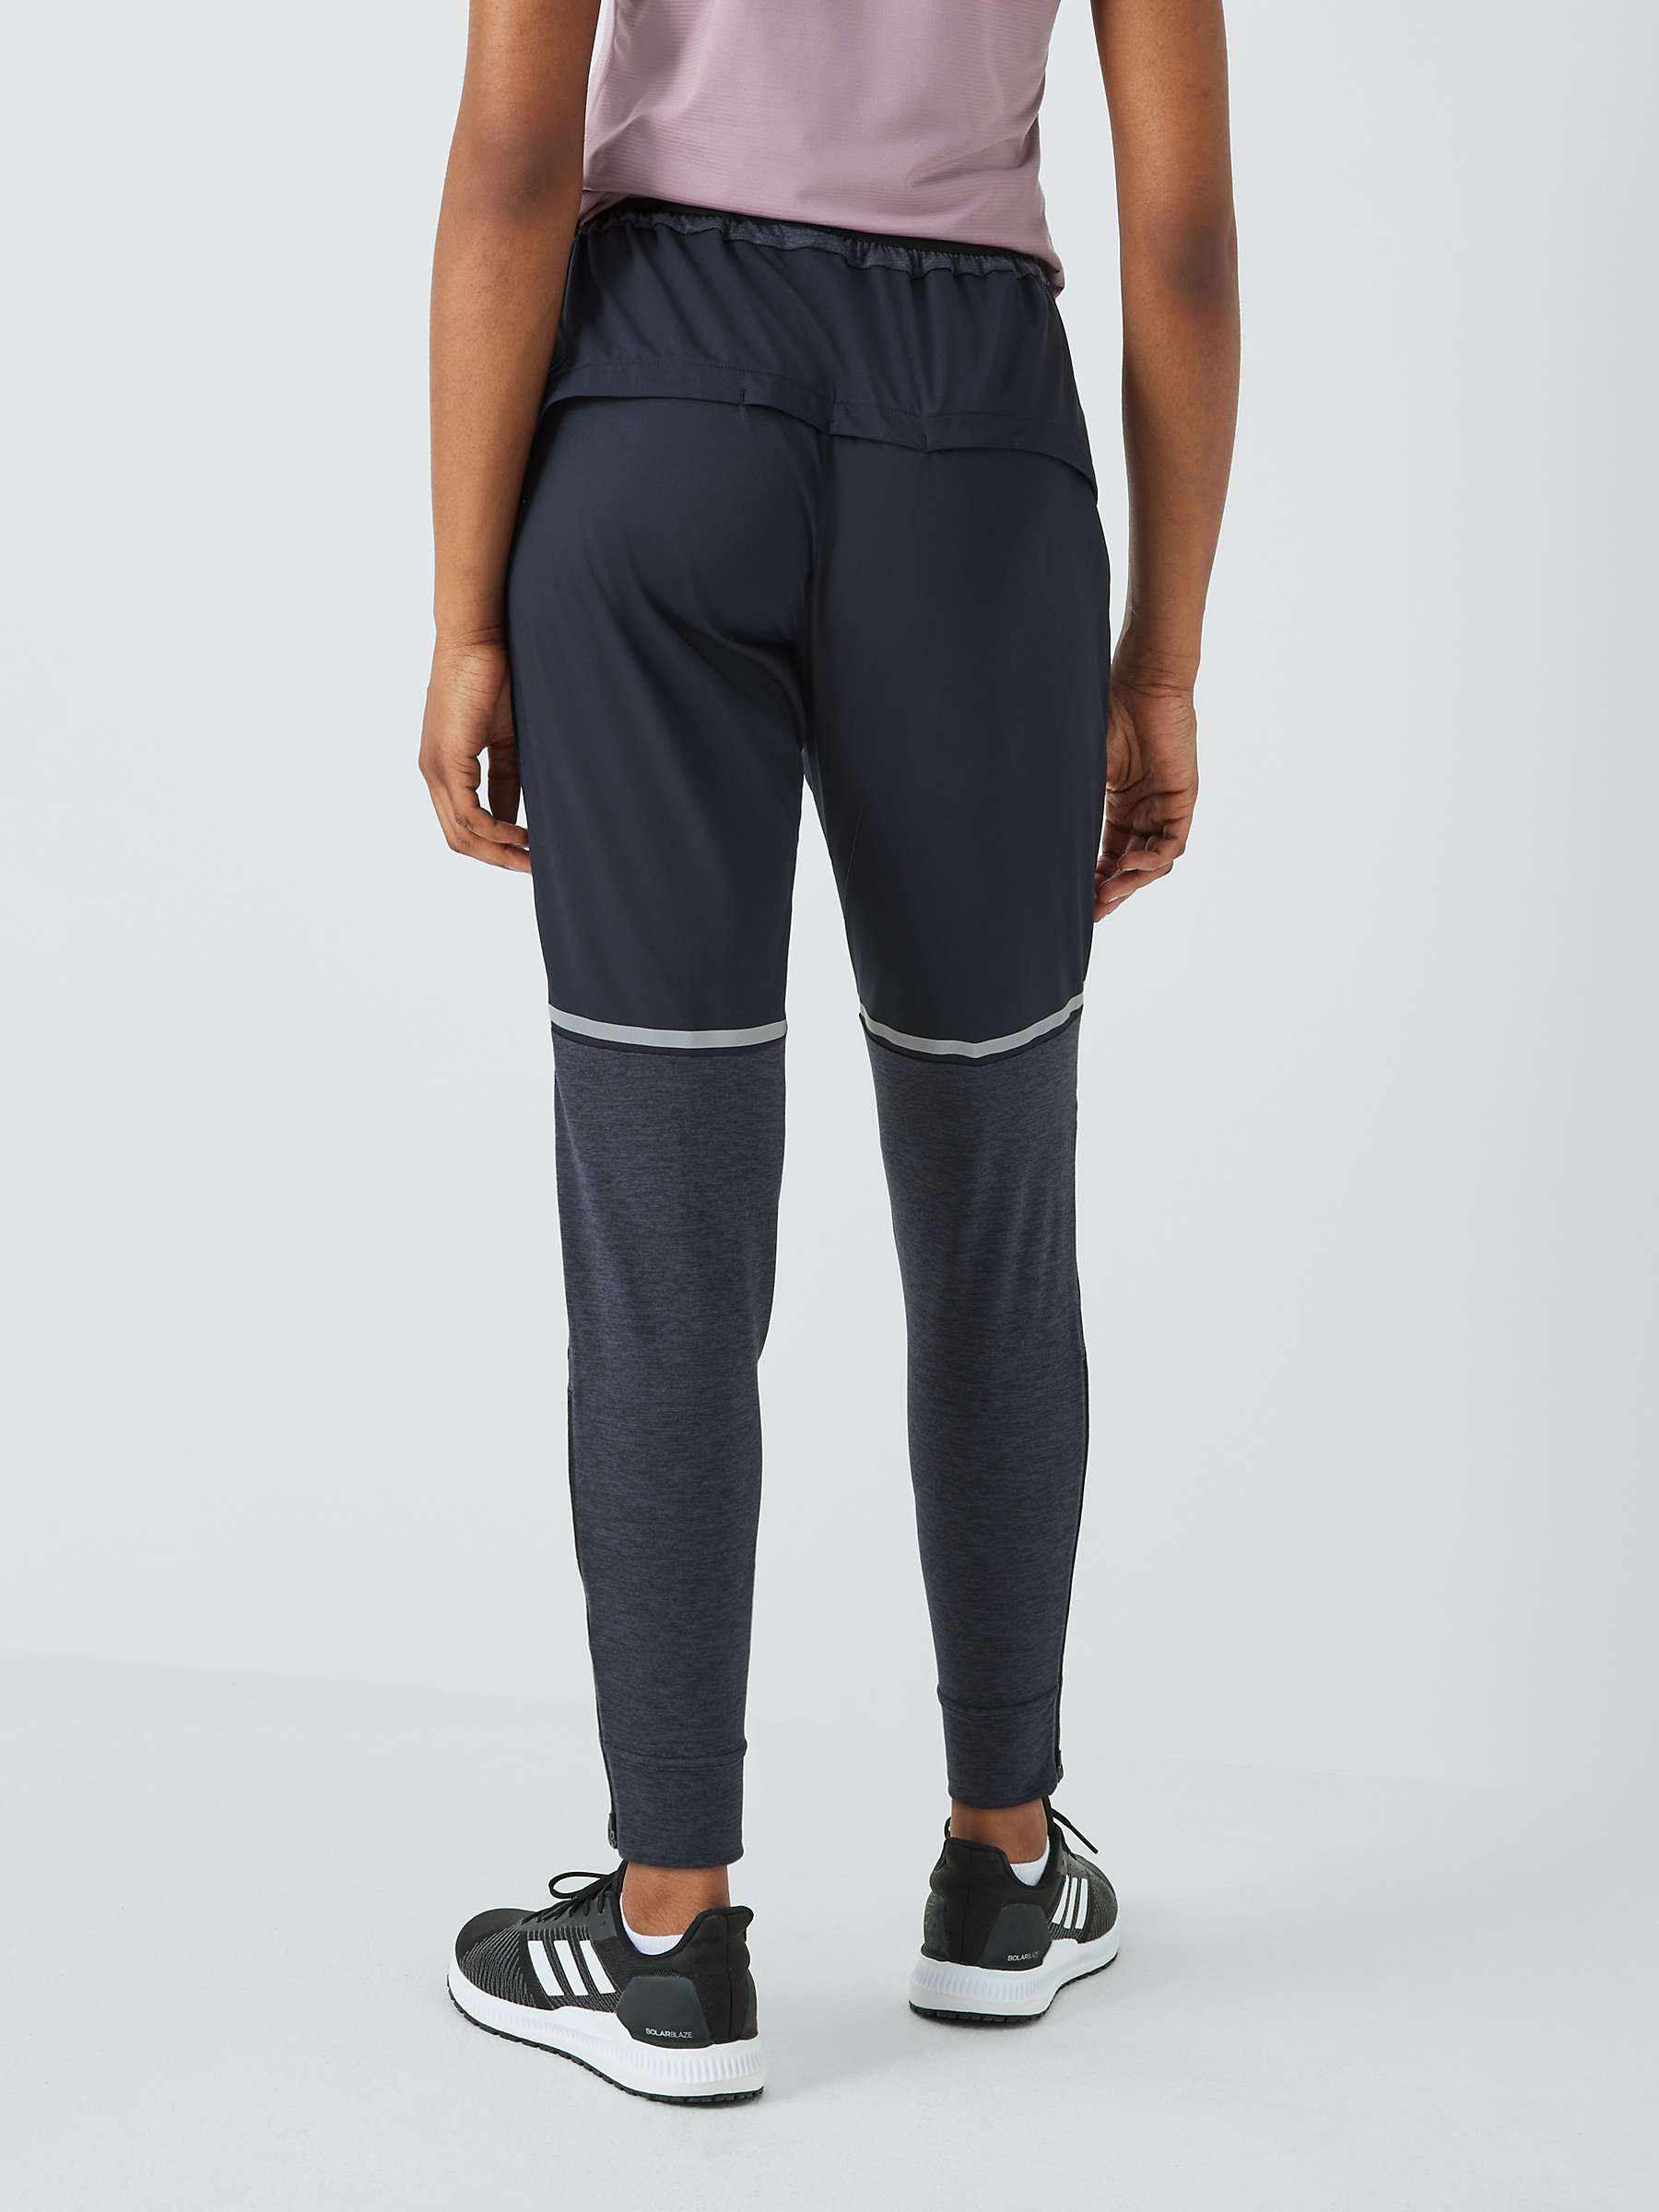 Buy Ronhill Running Slim Fit Trousers, Black/Charcoal Marl Online at johnlewis.com